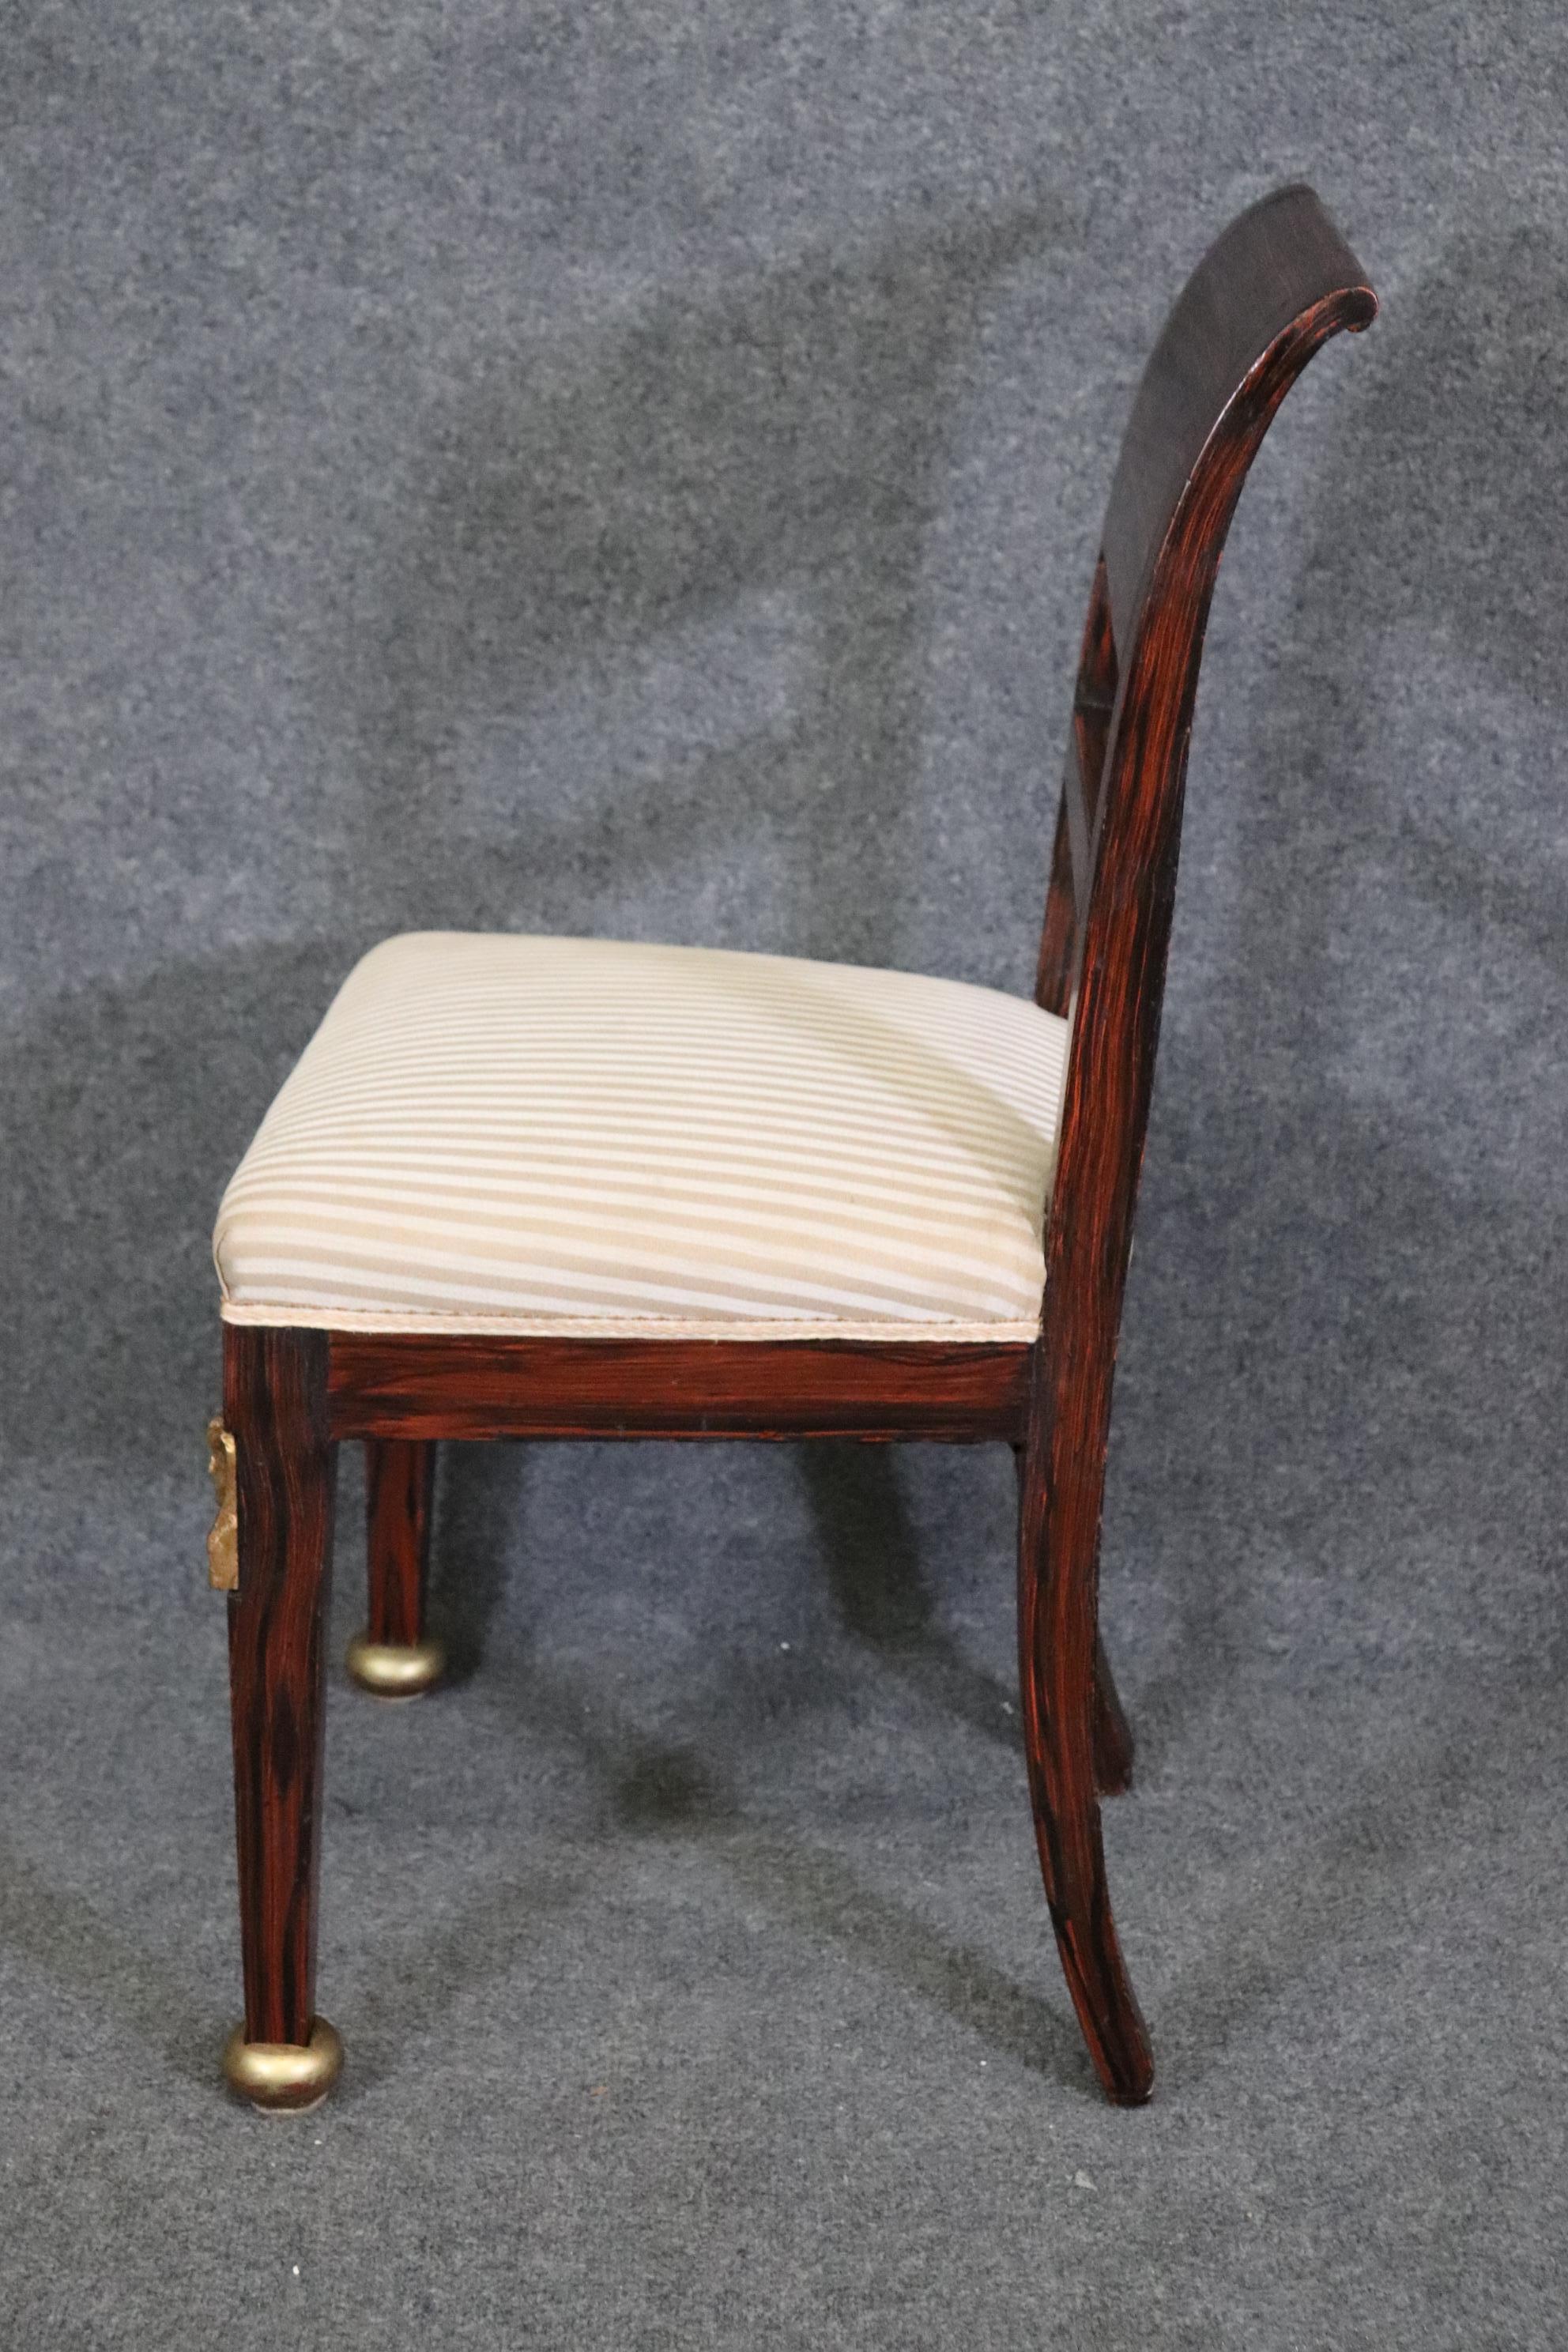 10 Antique French Empire Style Rosewood Dining Chairs, Side Chairs In Good Condition For Sale In Swedesboro, NJ